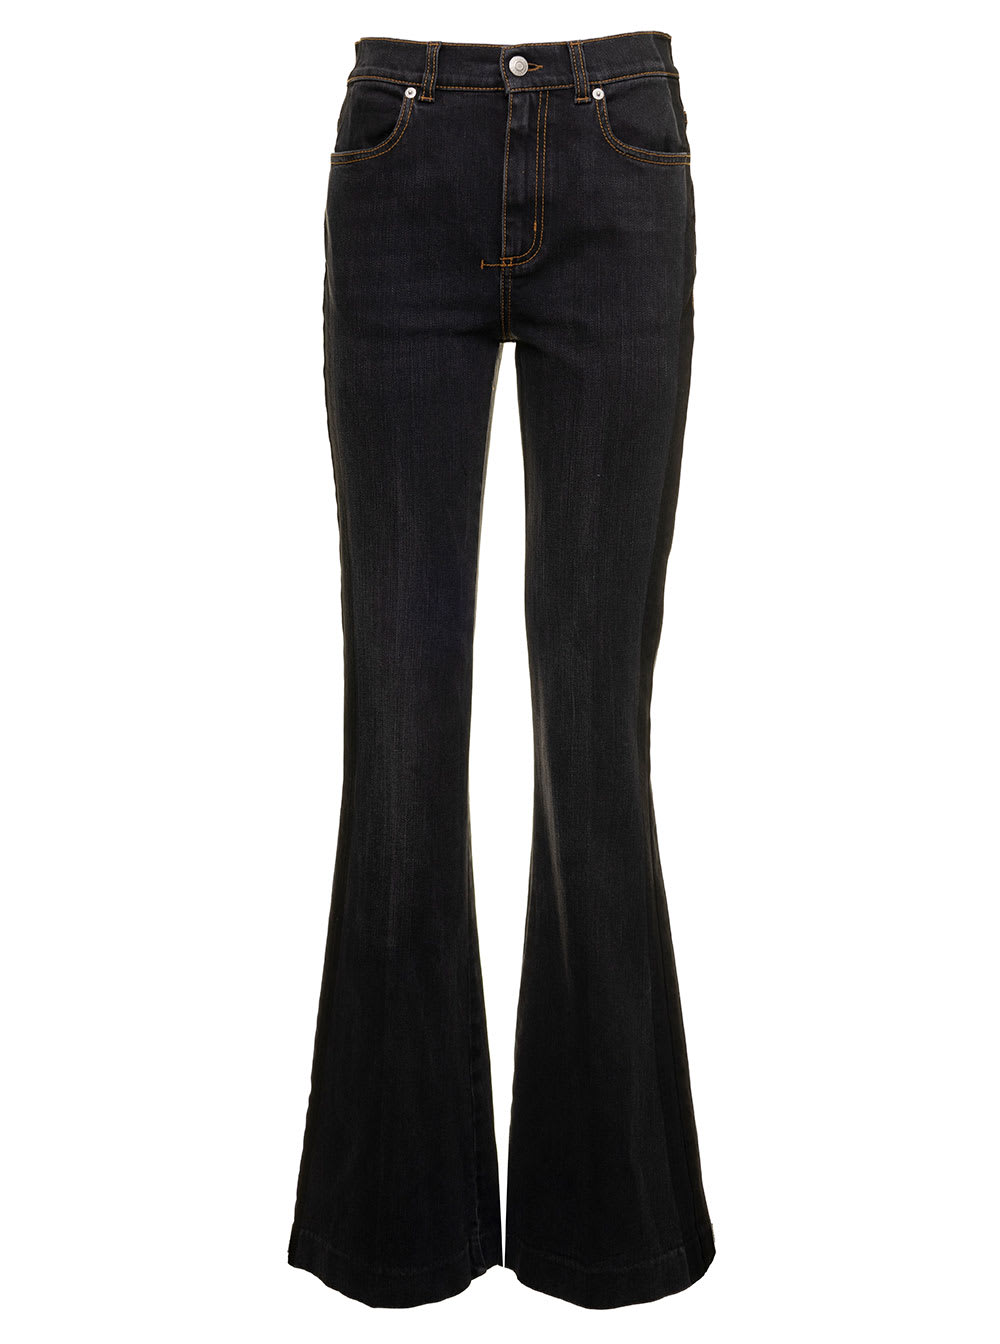 Stone Washed Black Bootcut Jeans In Stretch Denim Alexander Mcqueen Woman